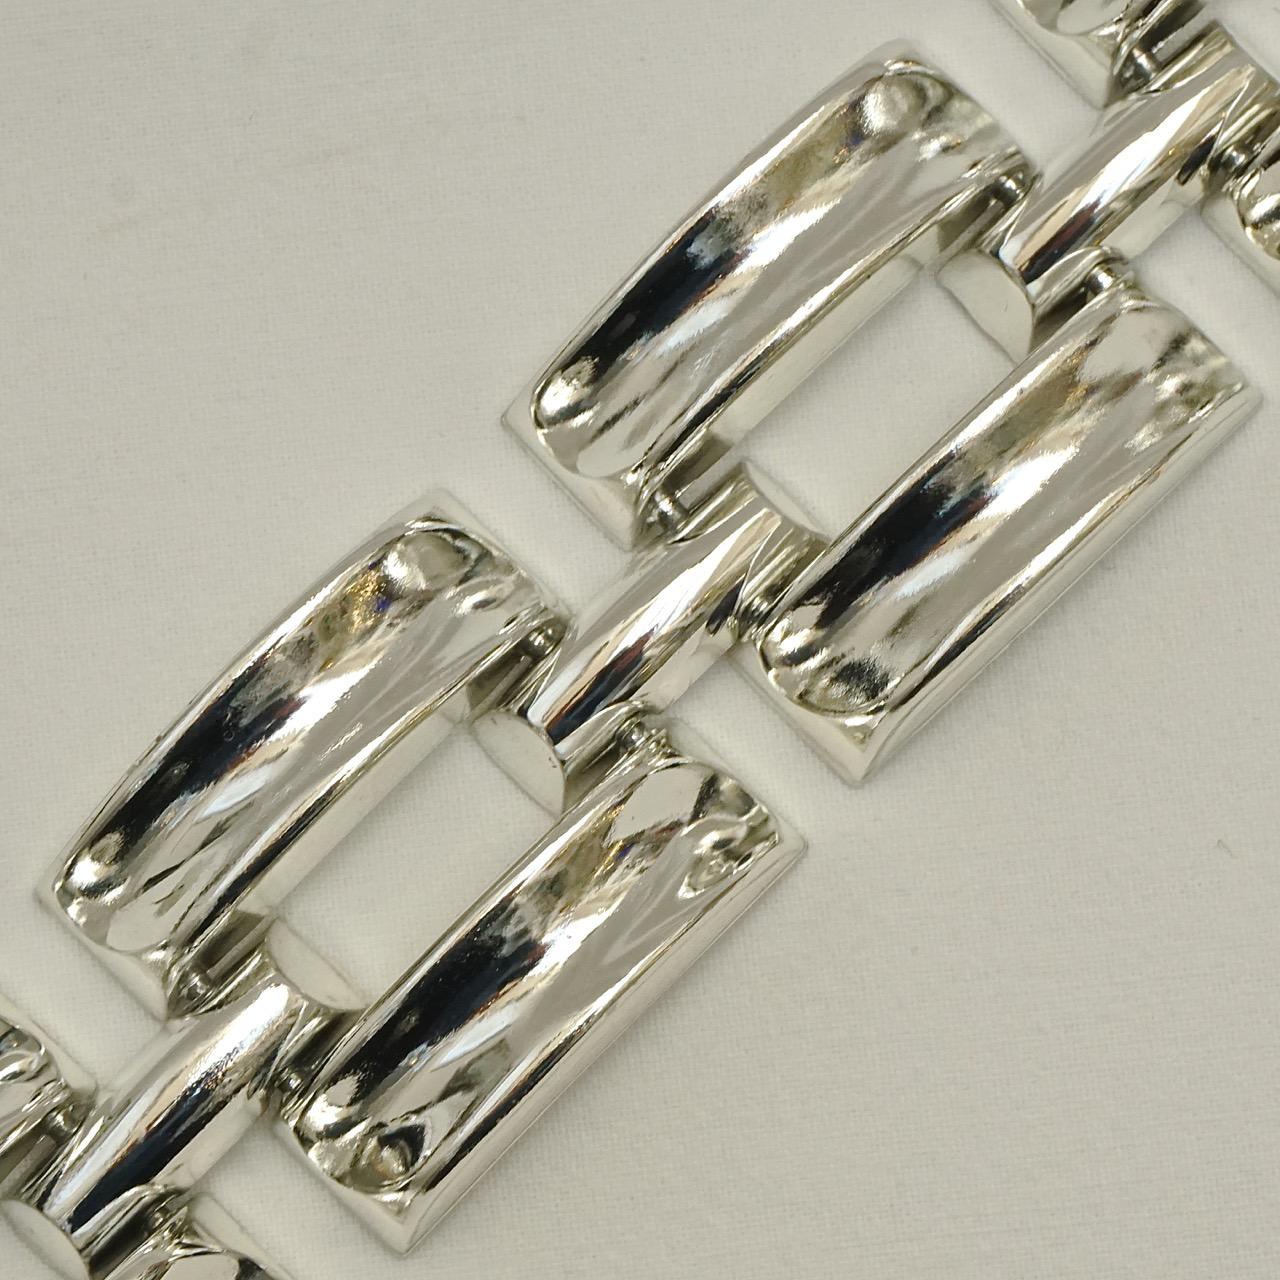 Great silver plated wide tank style link bracelet.  Length 17.3cm / 6.8 inches by width 3.2cm / 1.26 inches. There is some wear to the silver plating.

This is a wonderful silver tone statement bracelet in a simple classic design. Circa 1980s.